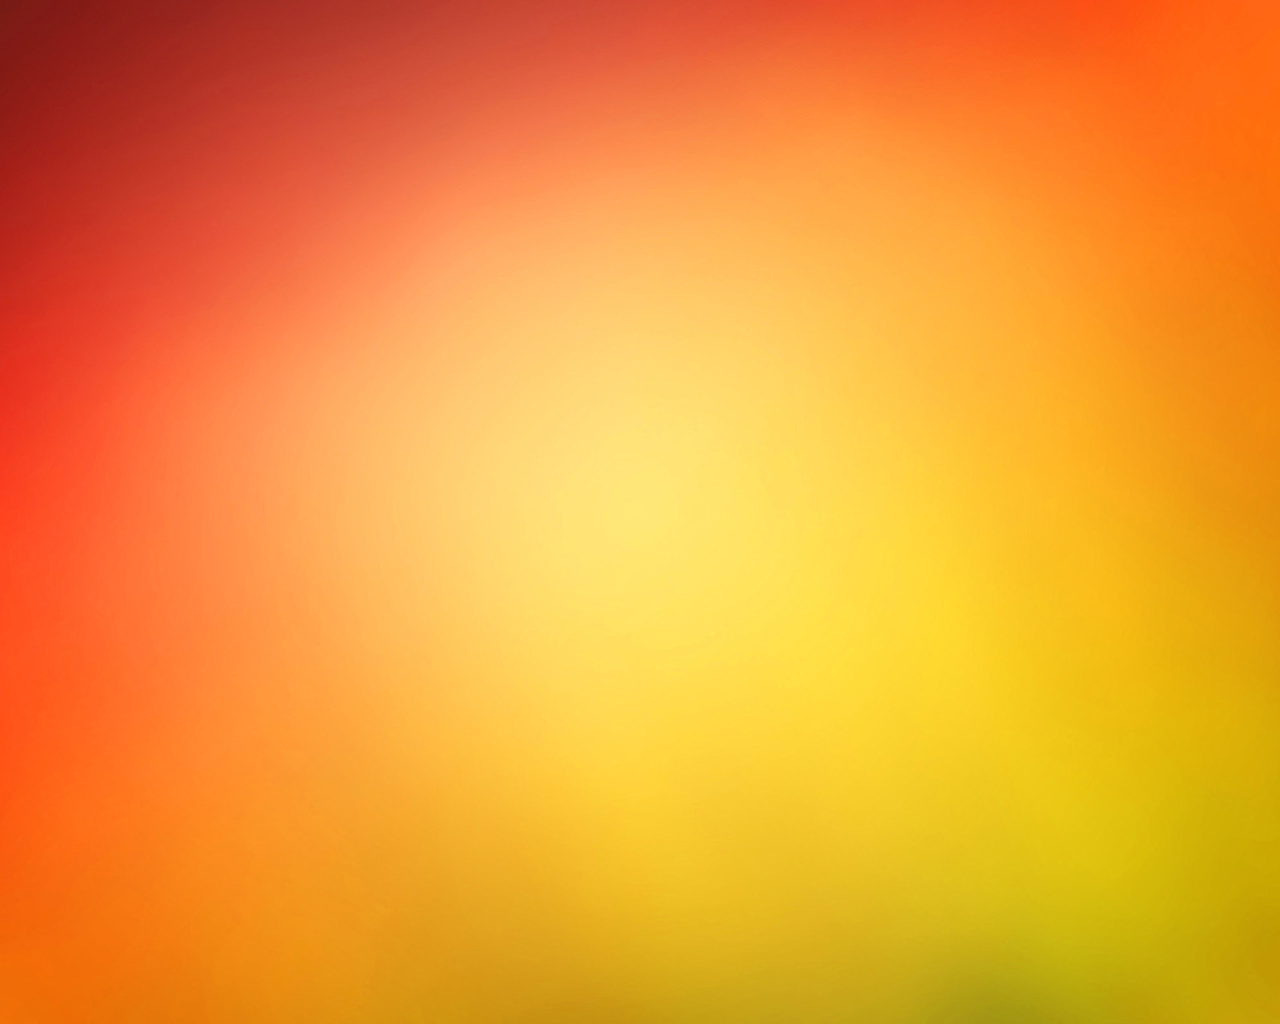 Light Colored Background wallpaper 1280x1024